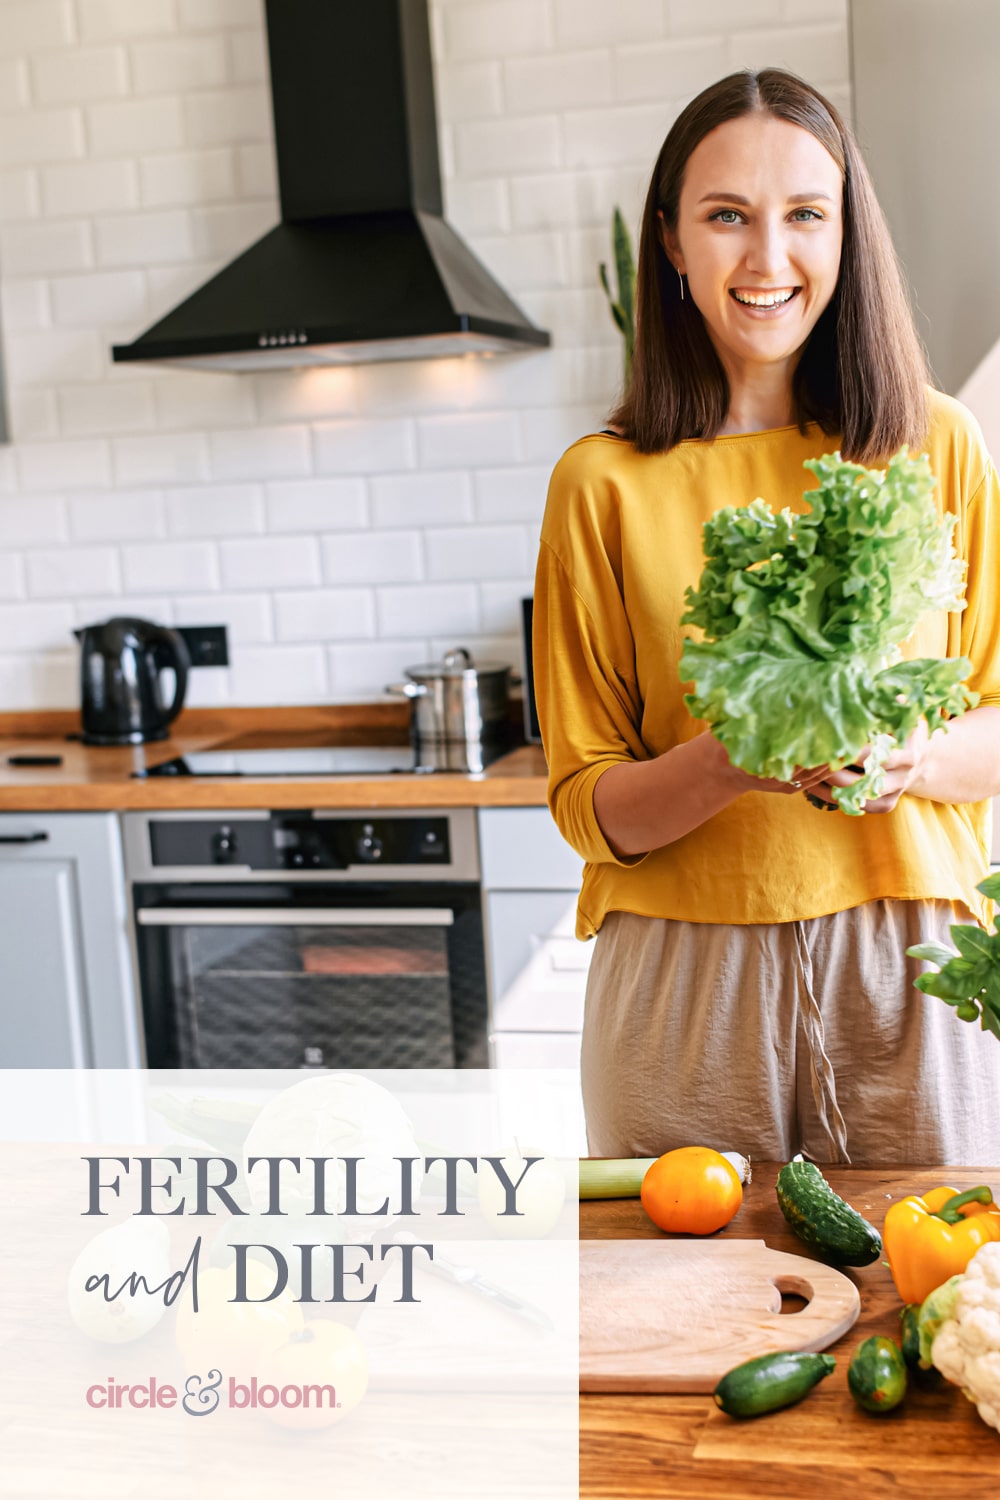 Fertility + Diet: Is there a Connection?